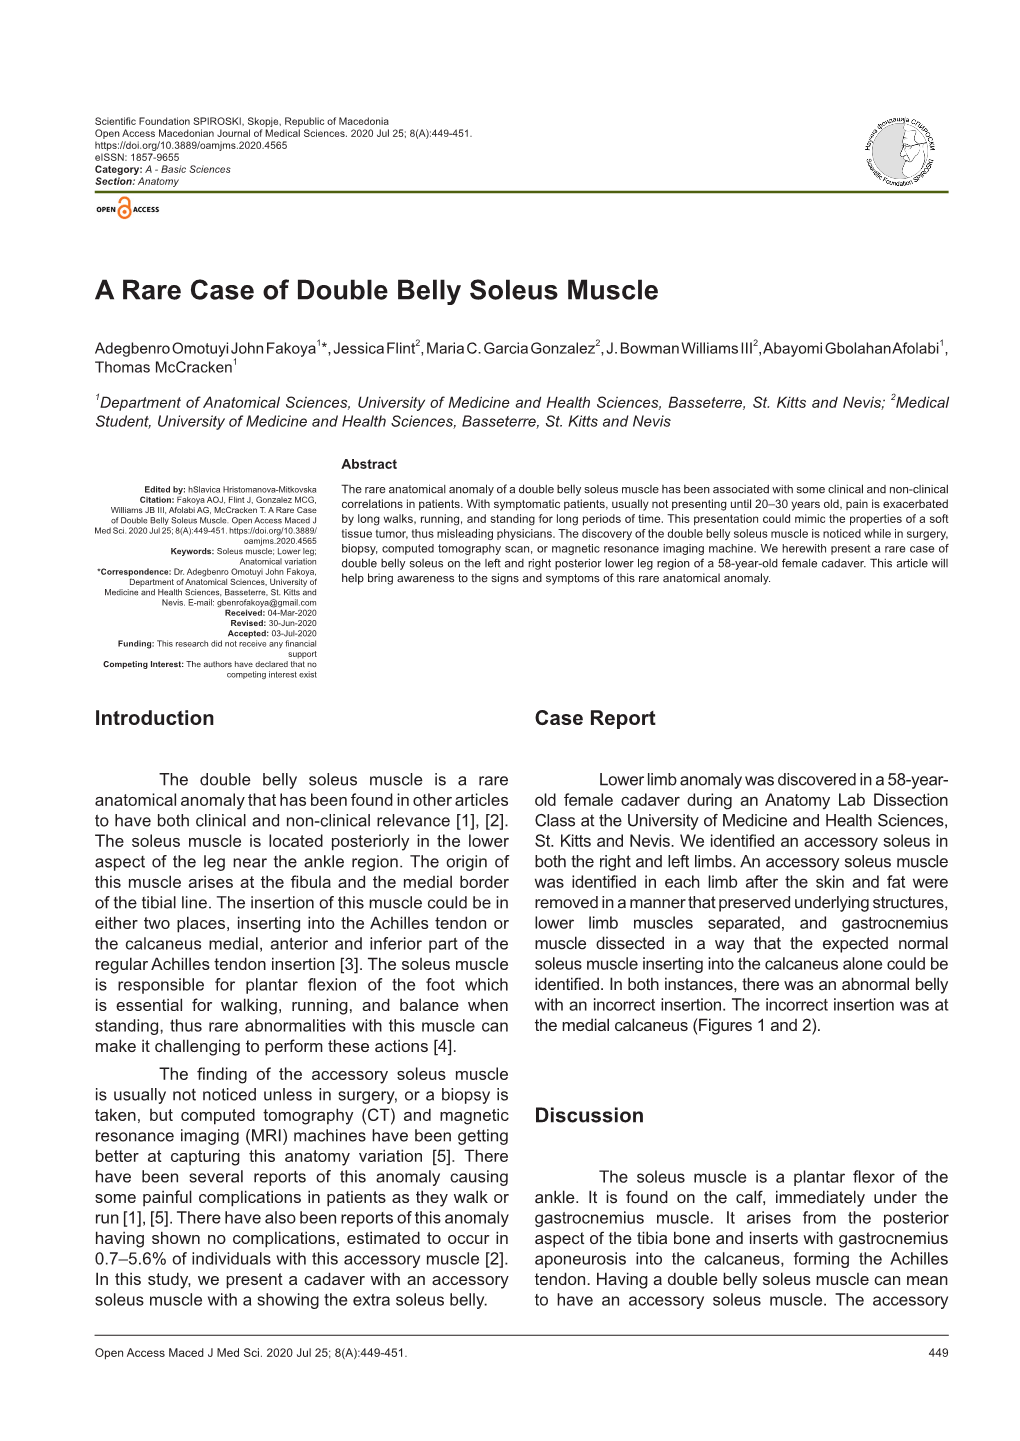 A Rare Case of Double Belly Soleus Muscle